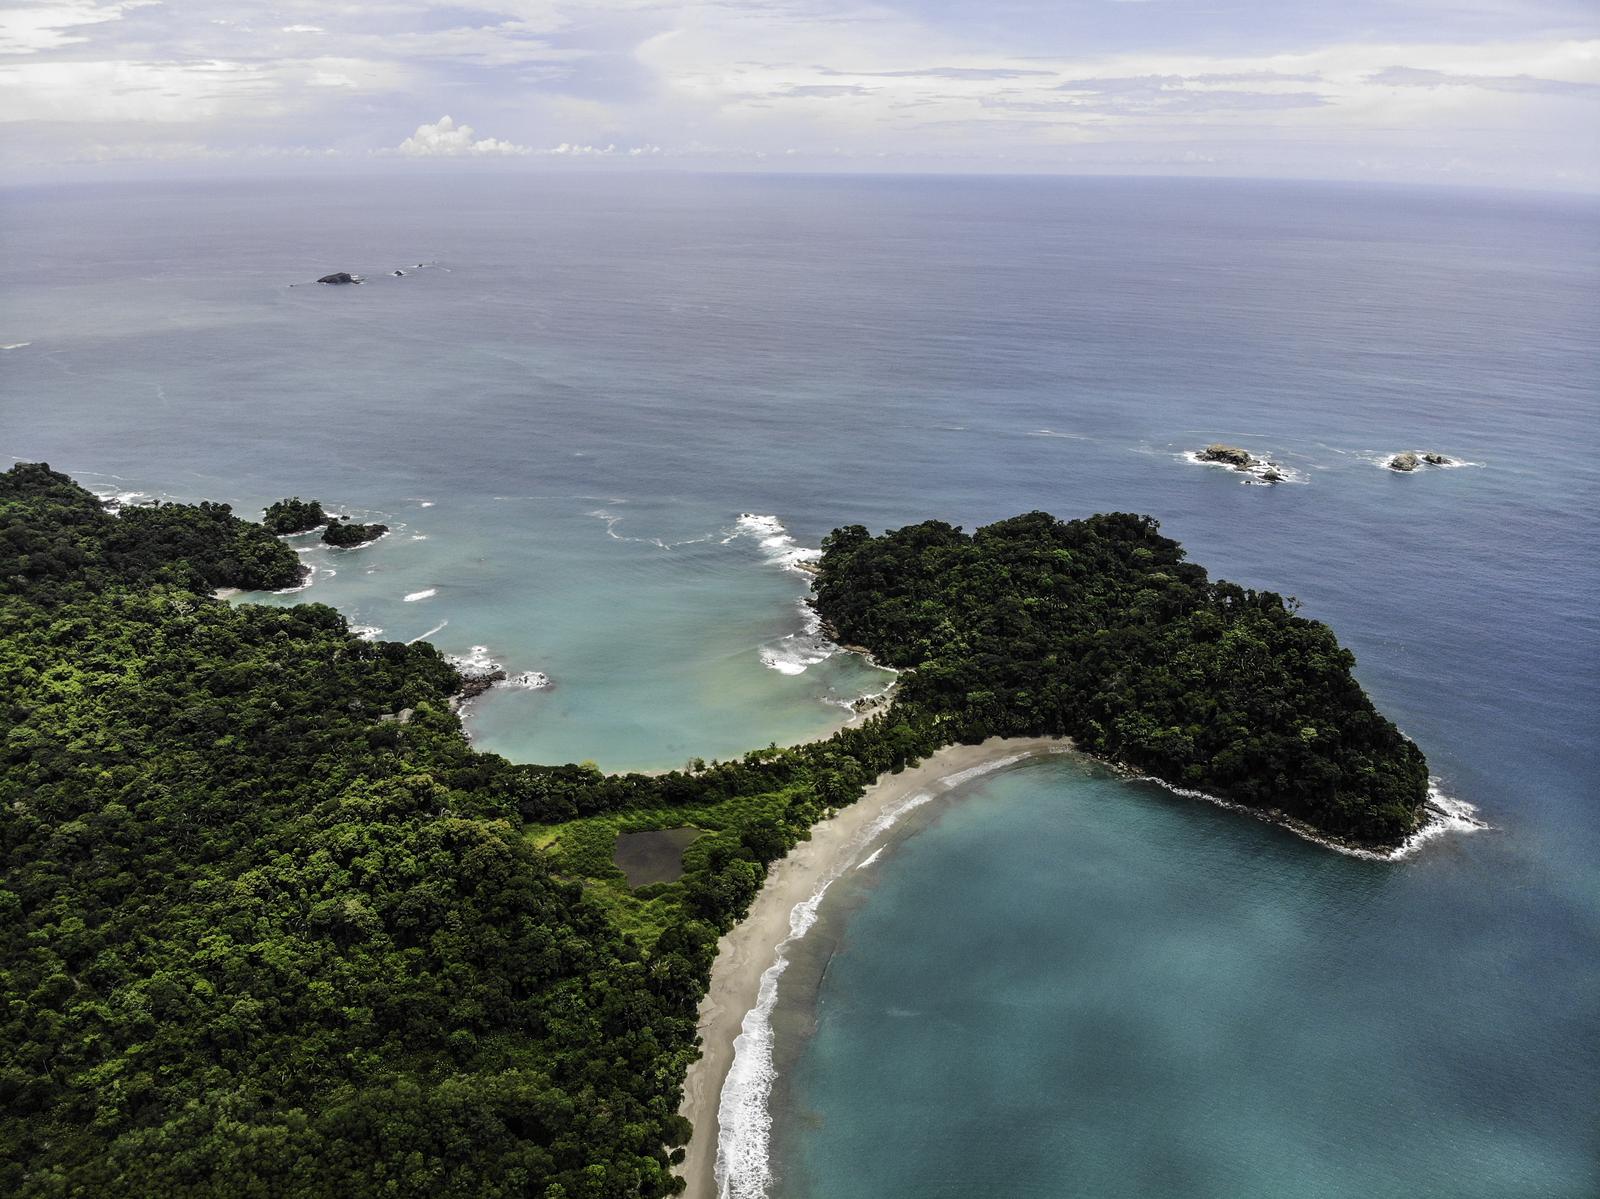 Are You a World Traveler? Test Your Knowledge by Matching These Majestic Natural Sites to Their Countries! Costa Rica